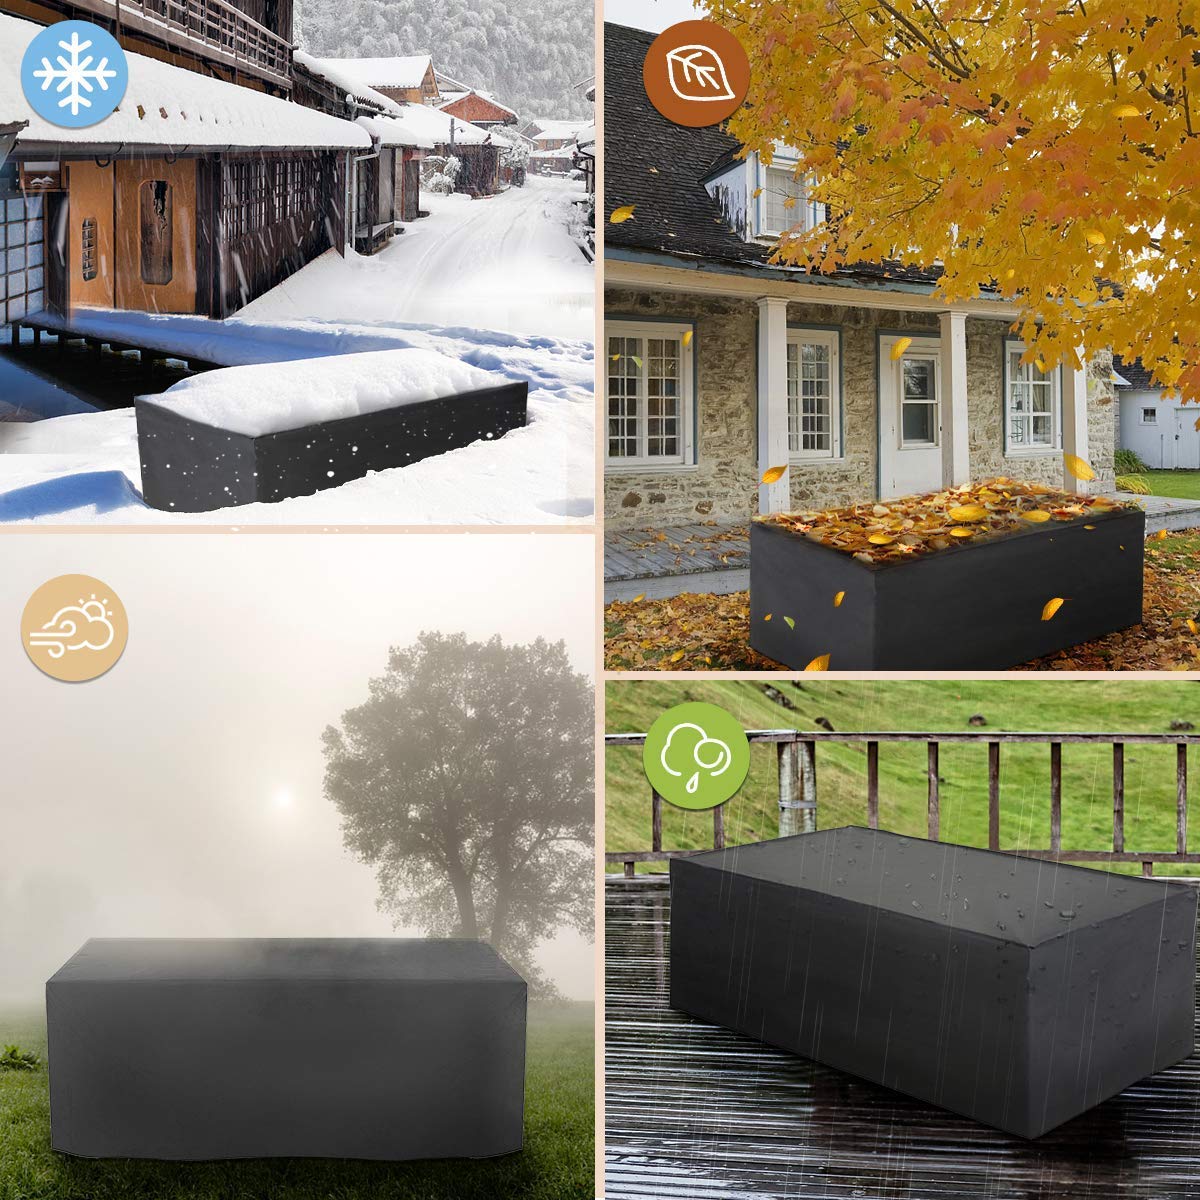 16 Sizes Brown Waterproof Outdoor Patio Garden Furniture Covers 210D Rain Snow Chair covers Sofa Table Chair Dust Proof Cover